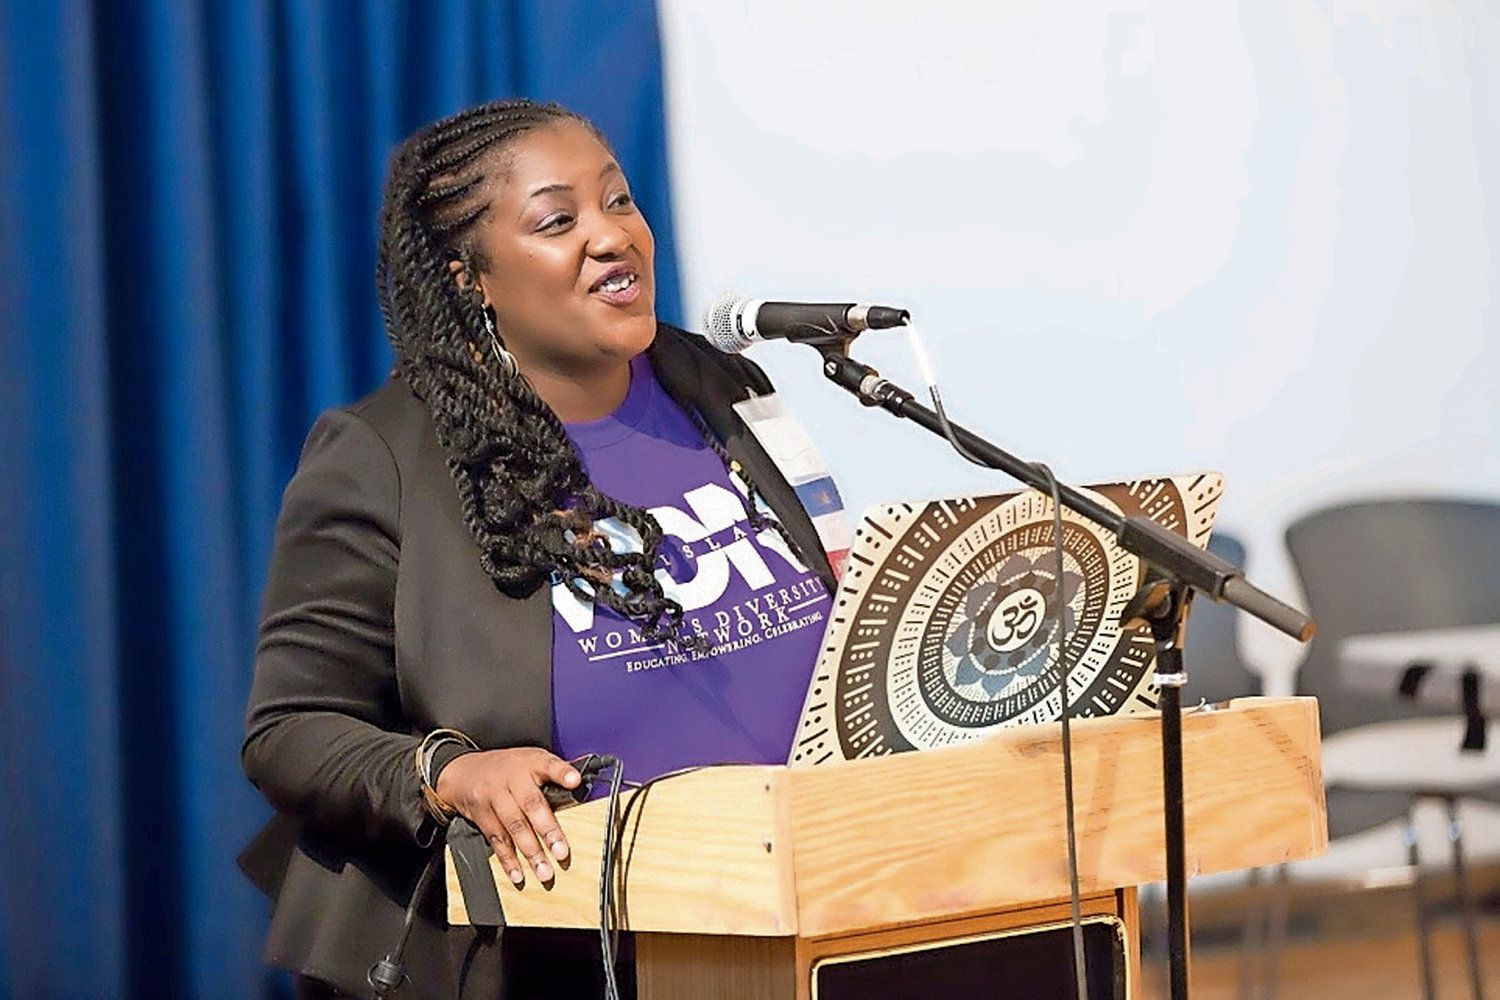 Shanequa Levin, 40, of Huntington Station, is the founder of Women’s Diversity Network, a group that advocates for the racial and cultural integration of systems.